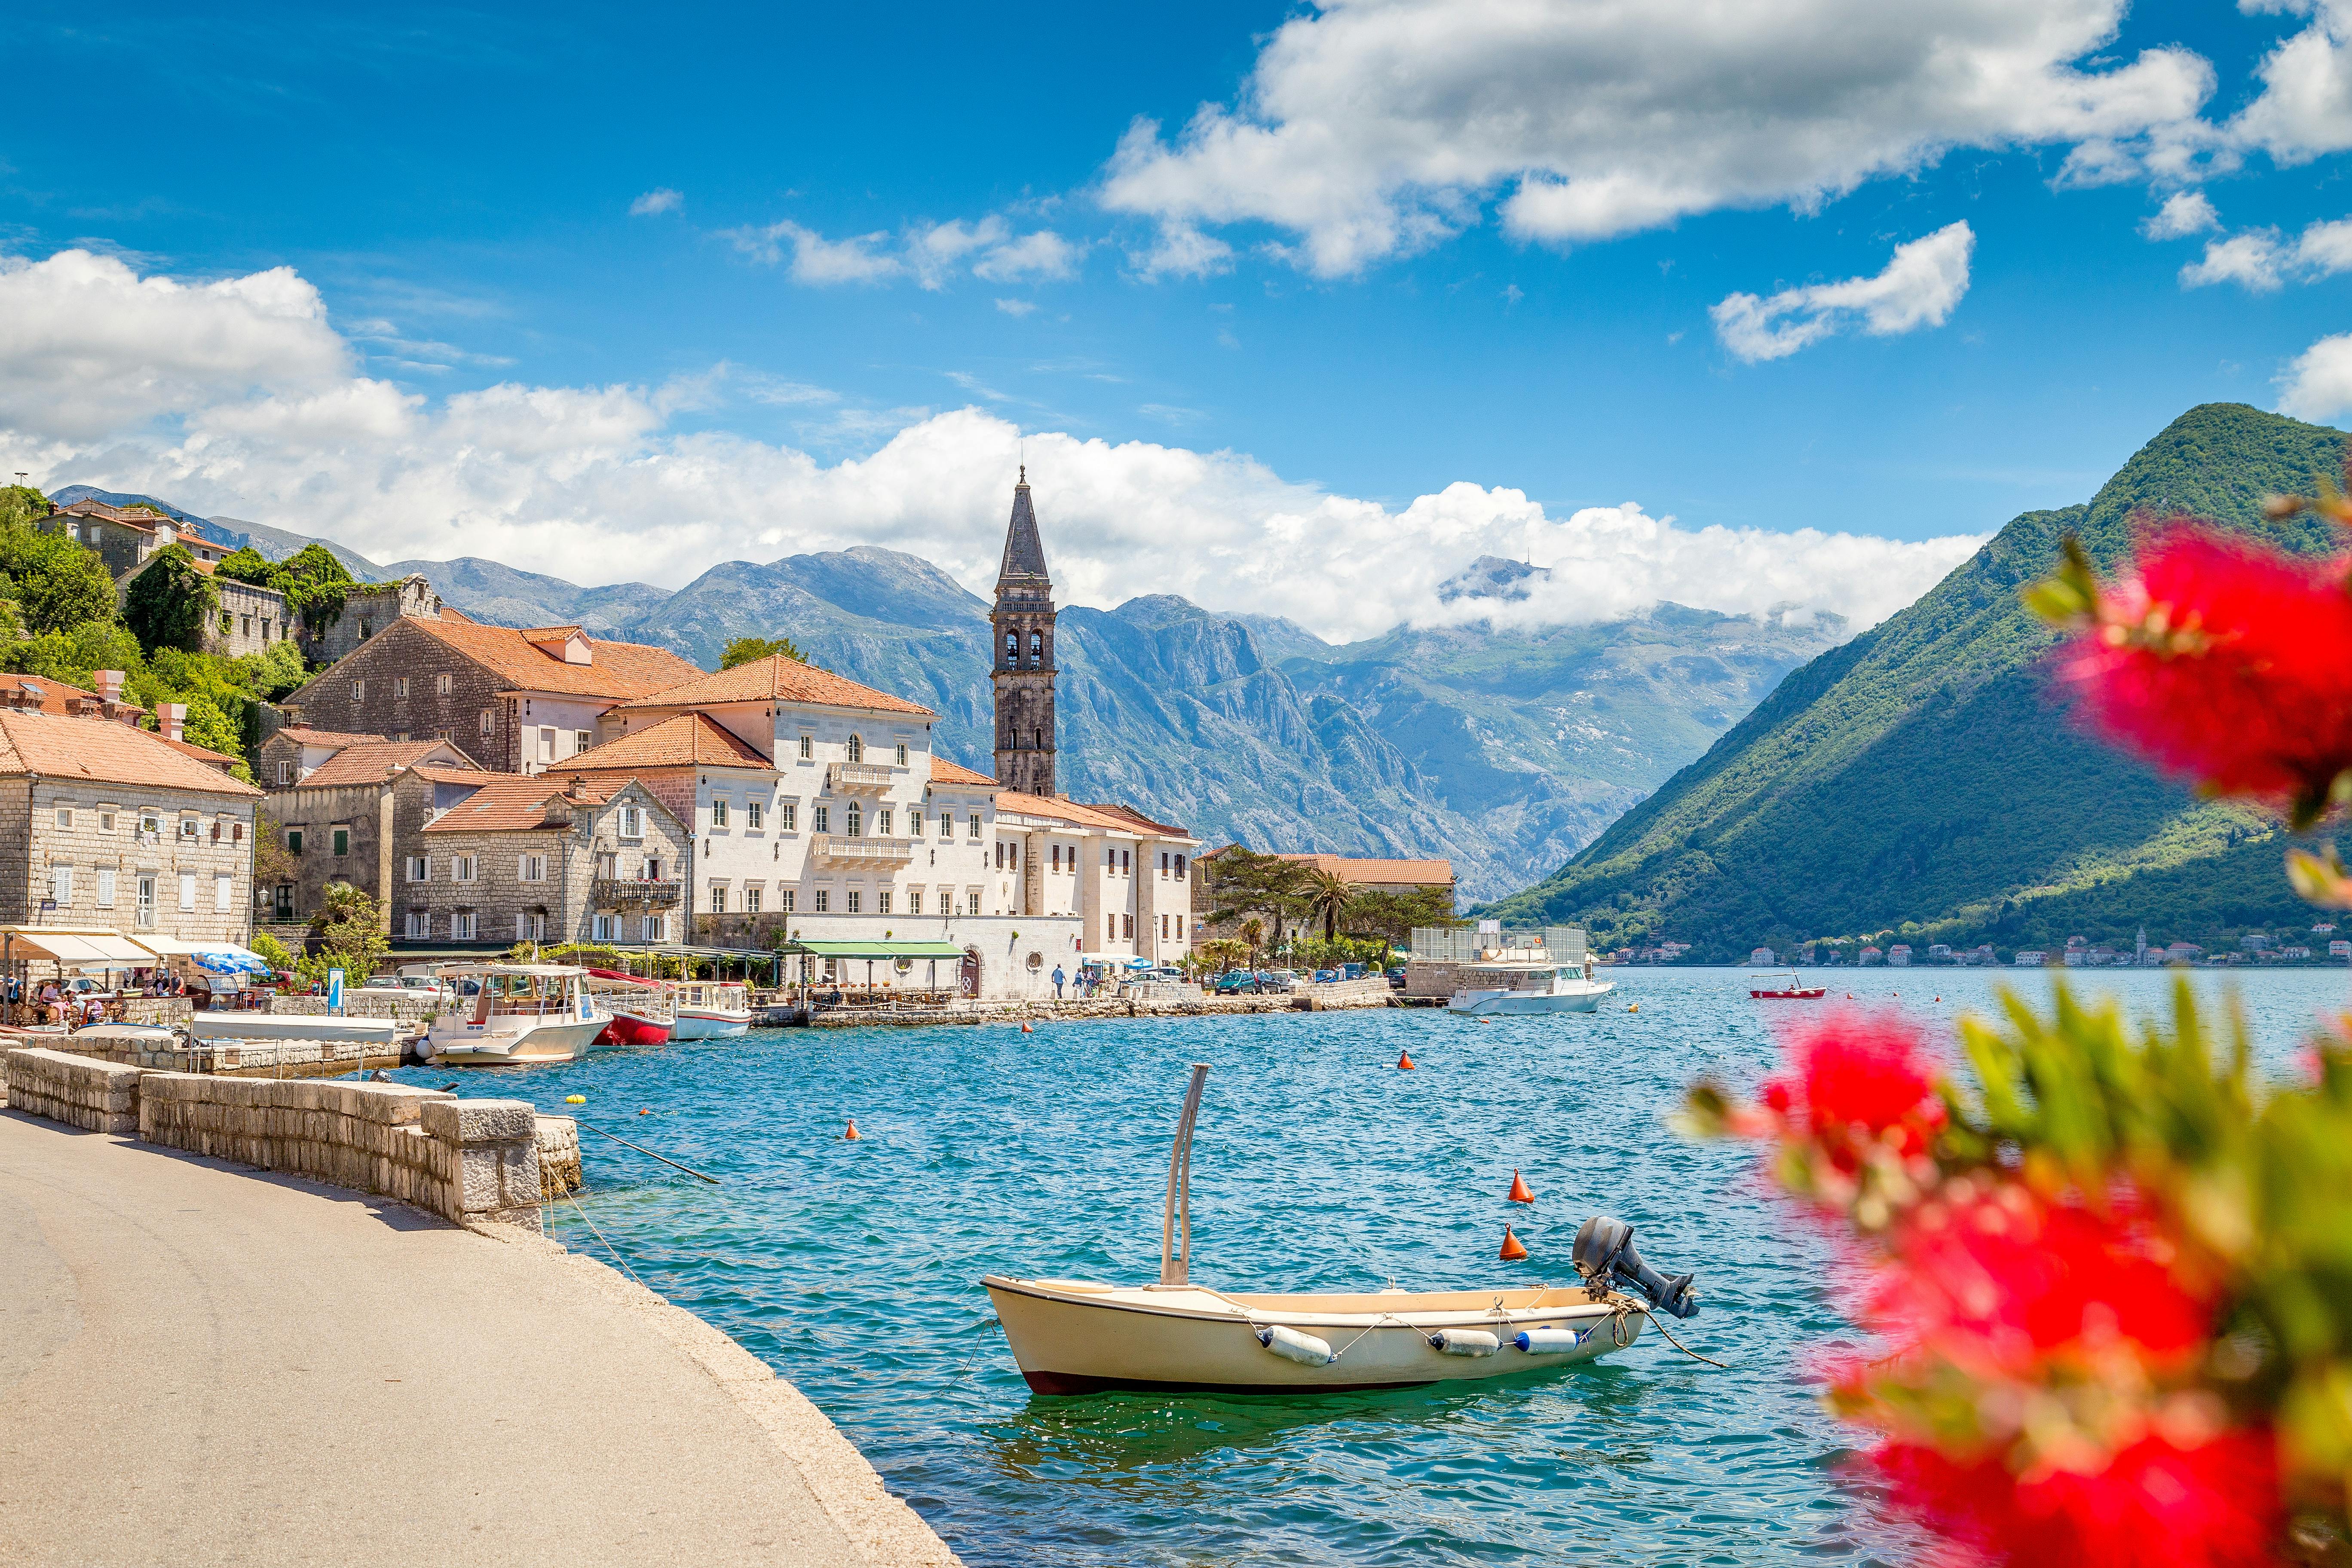 Private tour to Kotor and Perast from Dubrovnik